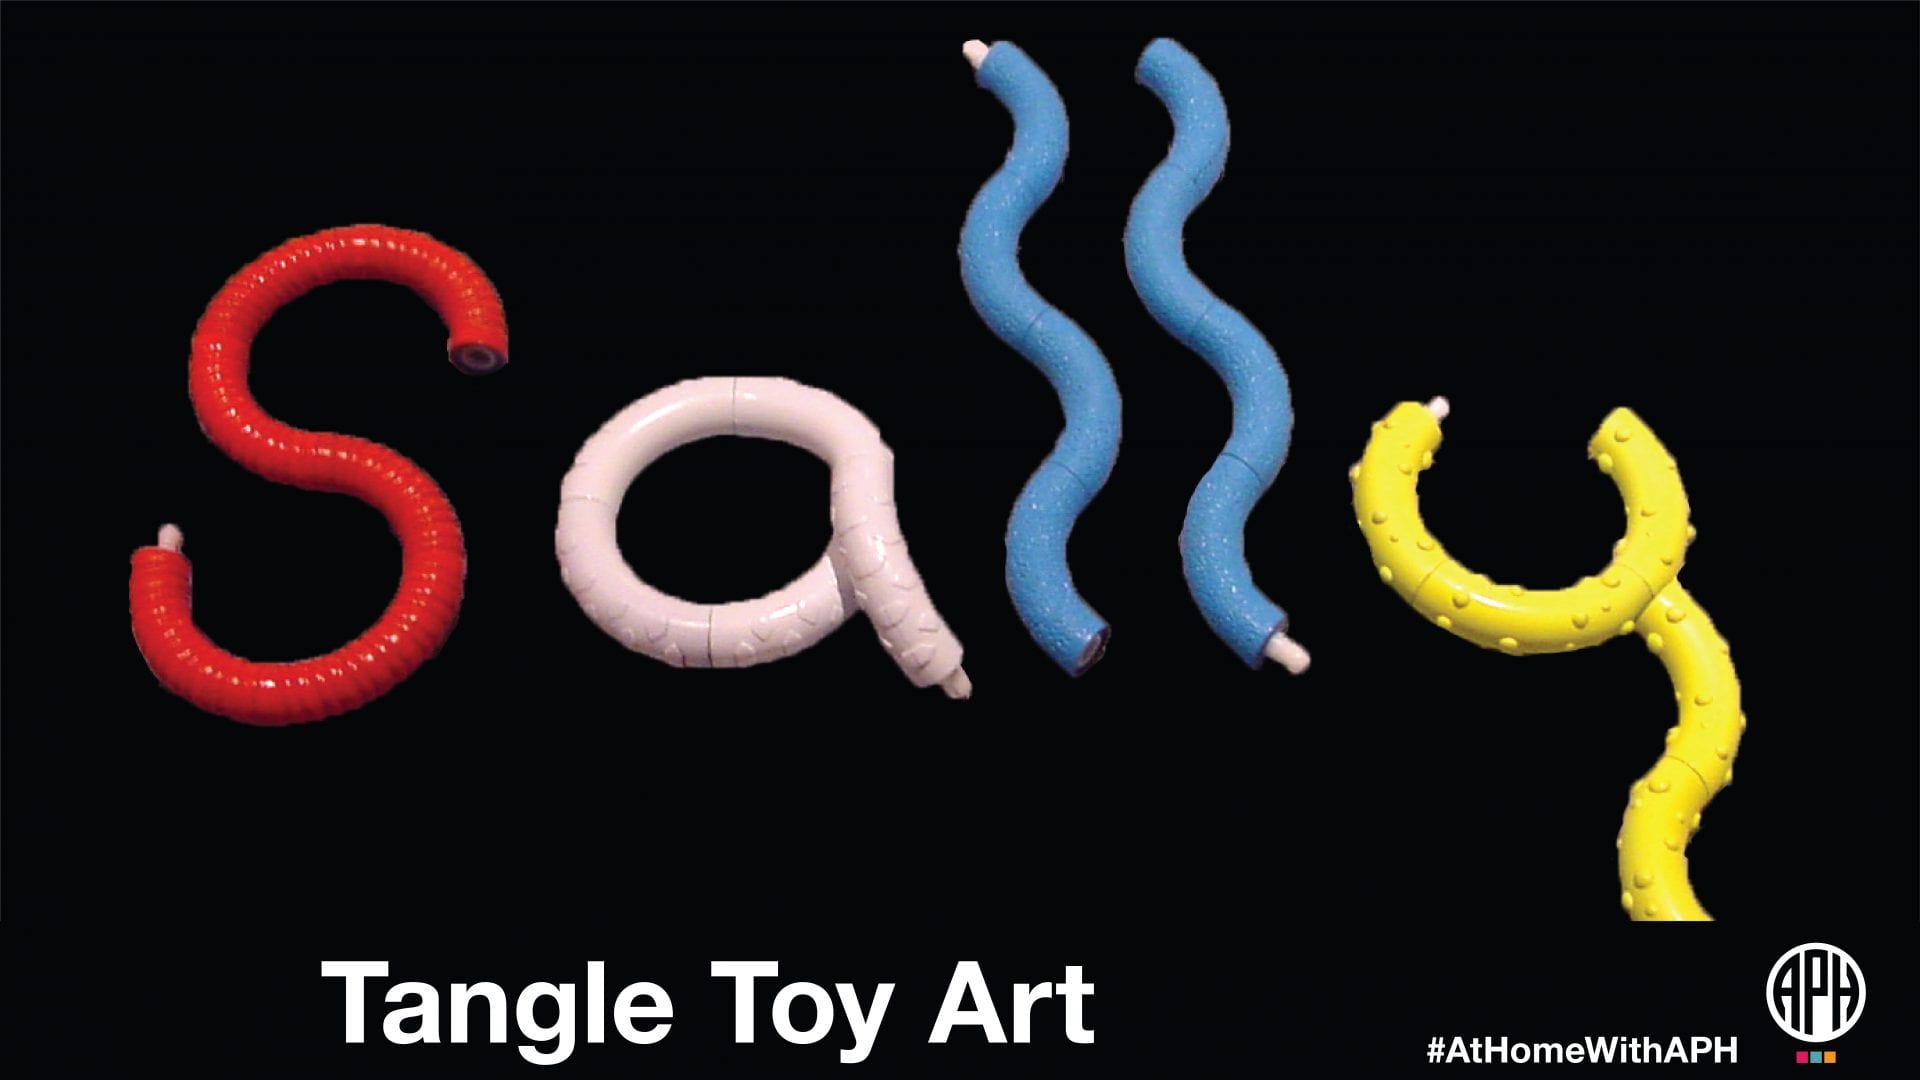 the name "sally" written in tangle toy segments on a black background. text reads "tangle toy art"